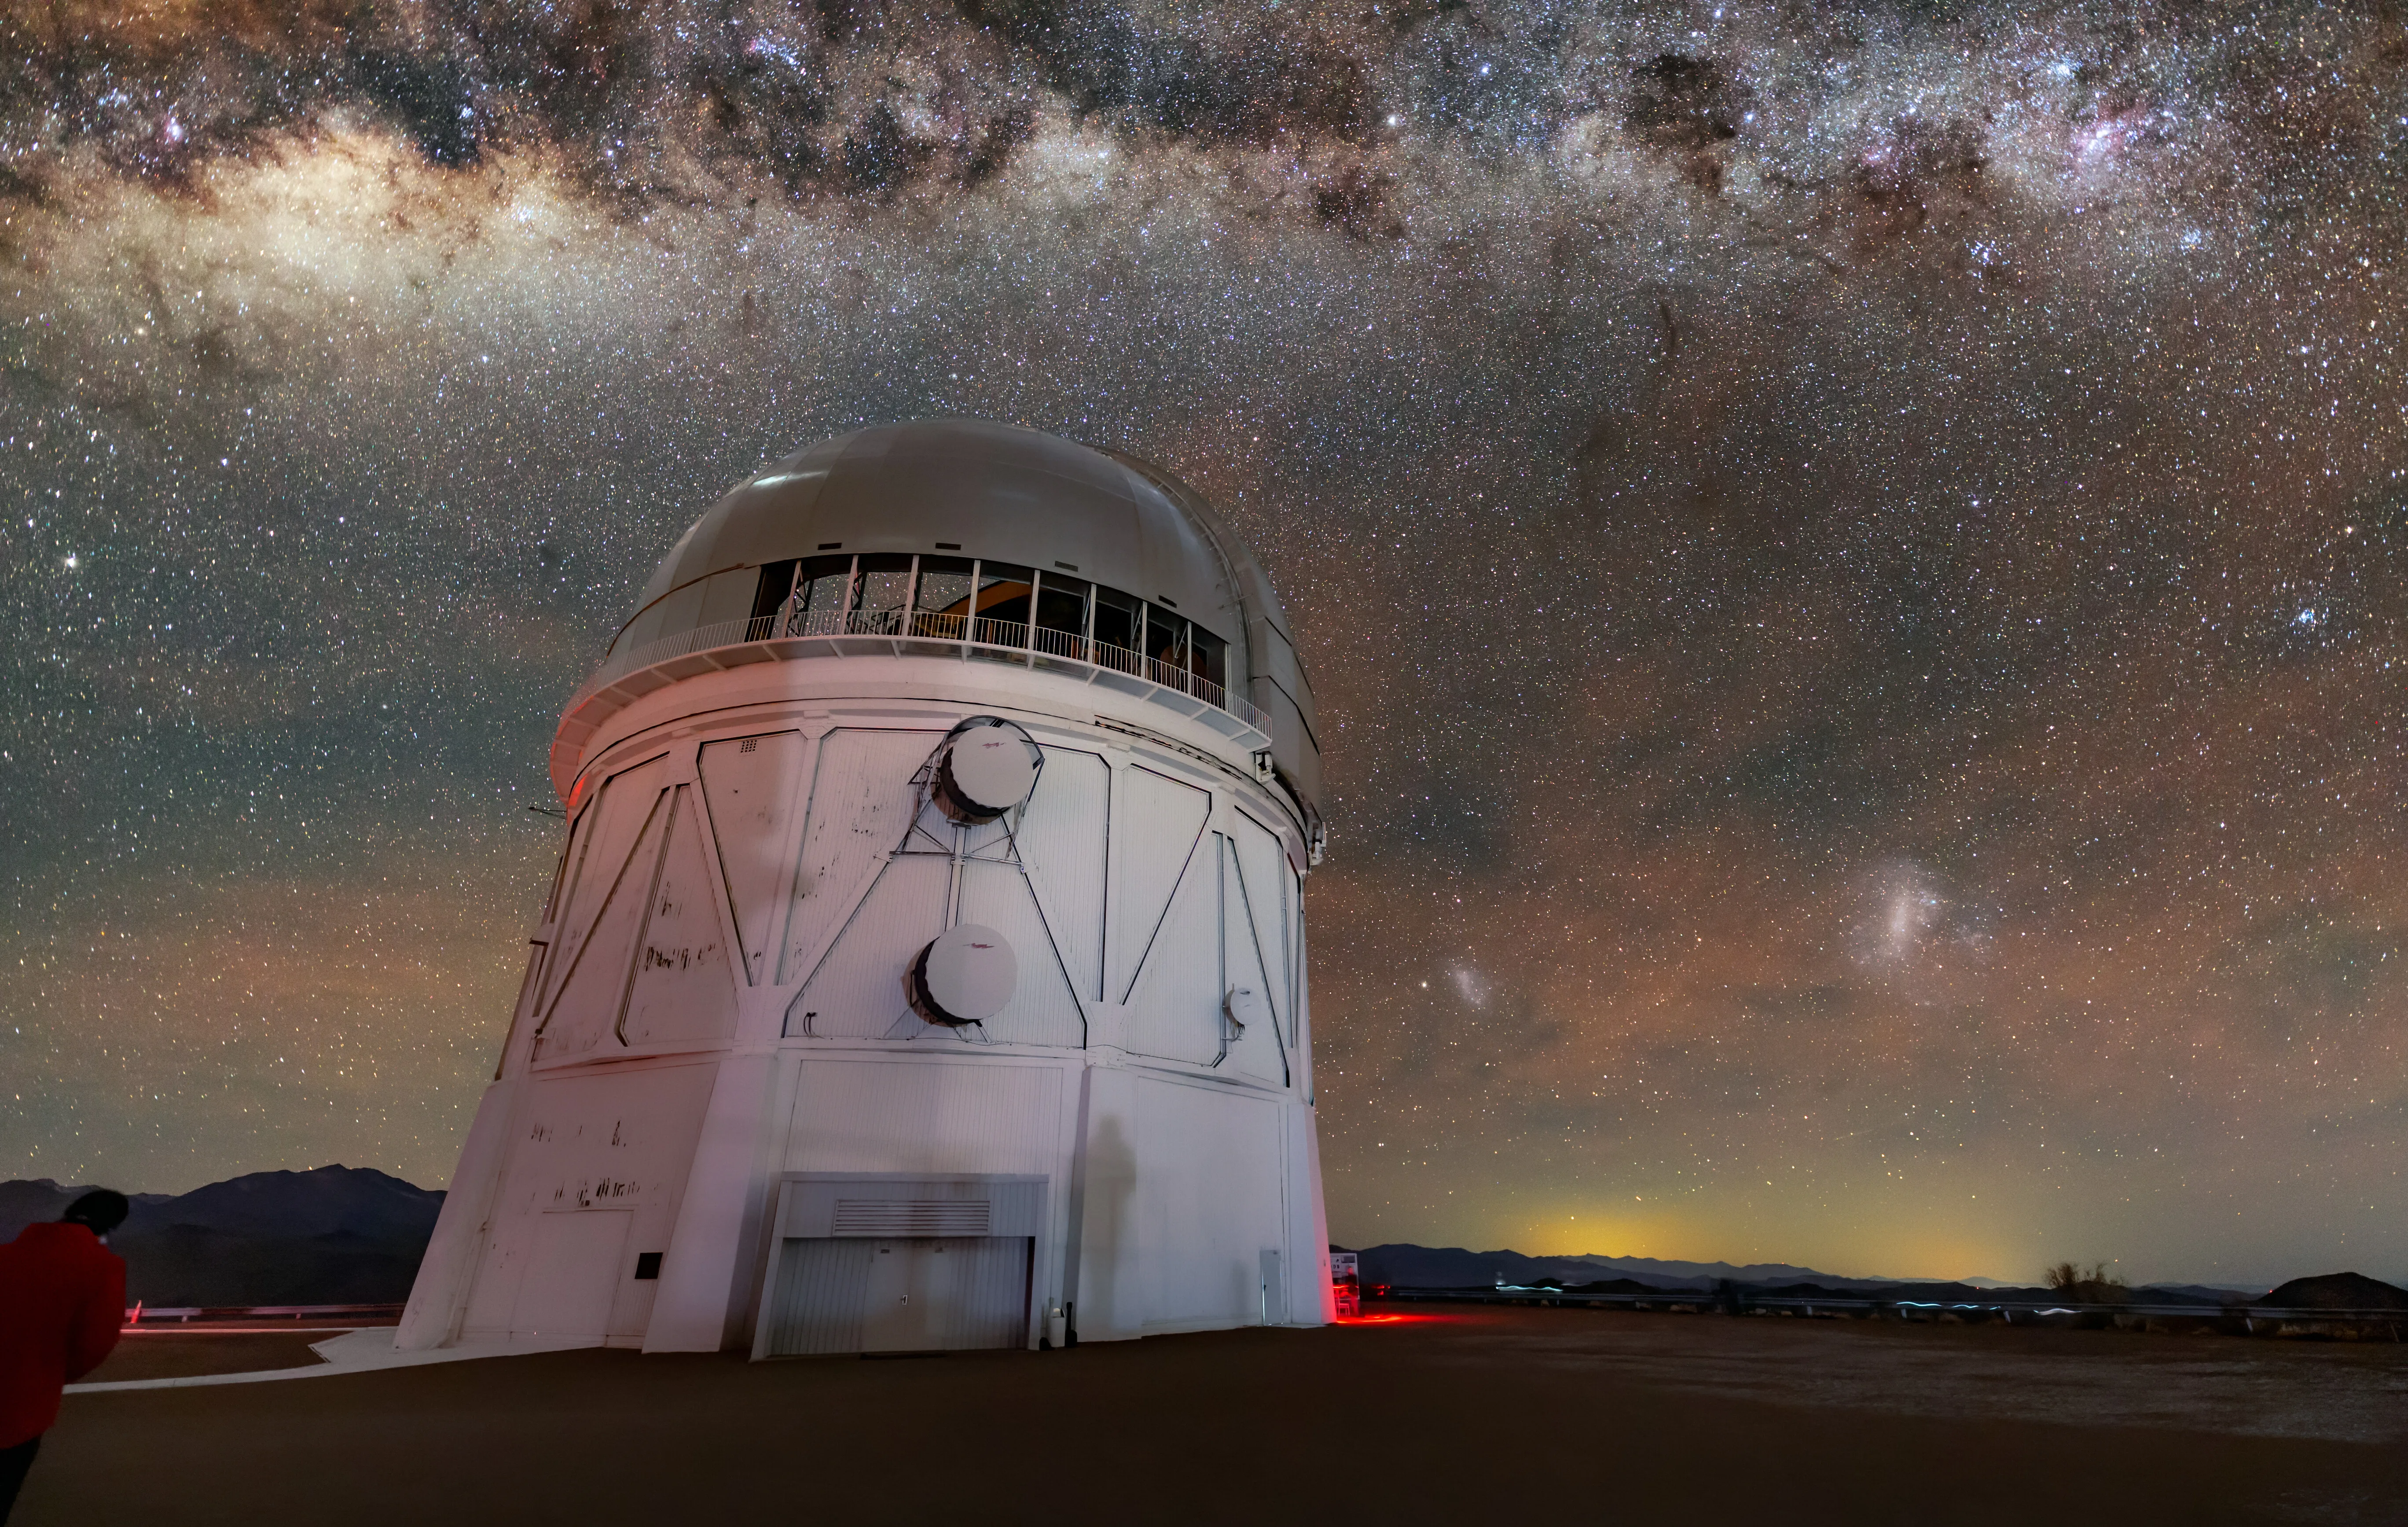 Cerro Tololo Astronomical Observatory in Chile, South America | Observatories & Planetariums - Rated 3.9